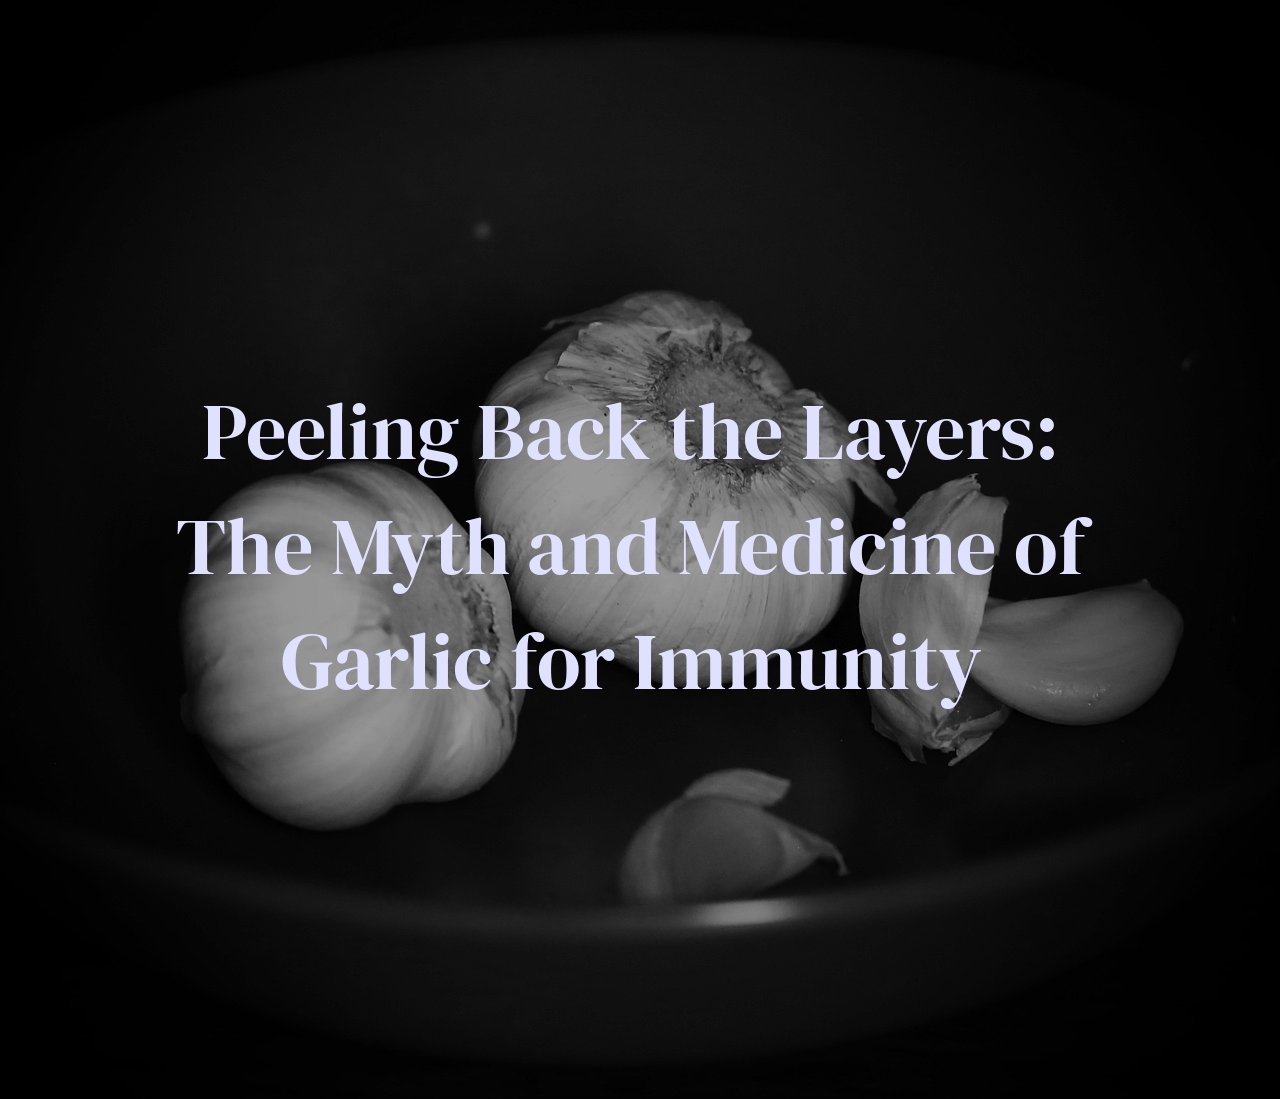 Peeling Back the Layers: The Myth and Medicine of Garlic for Immunity